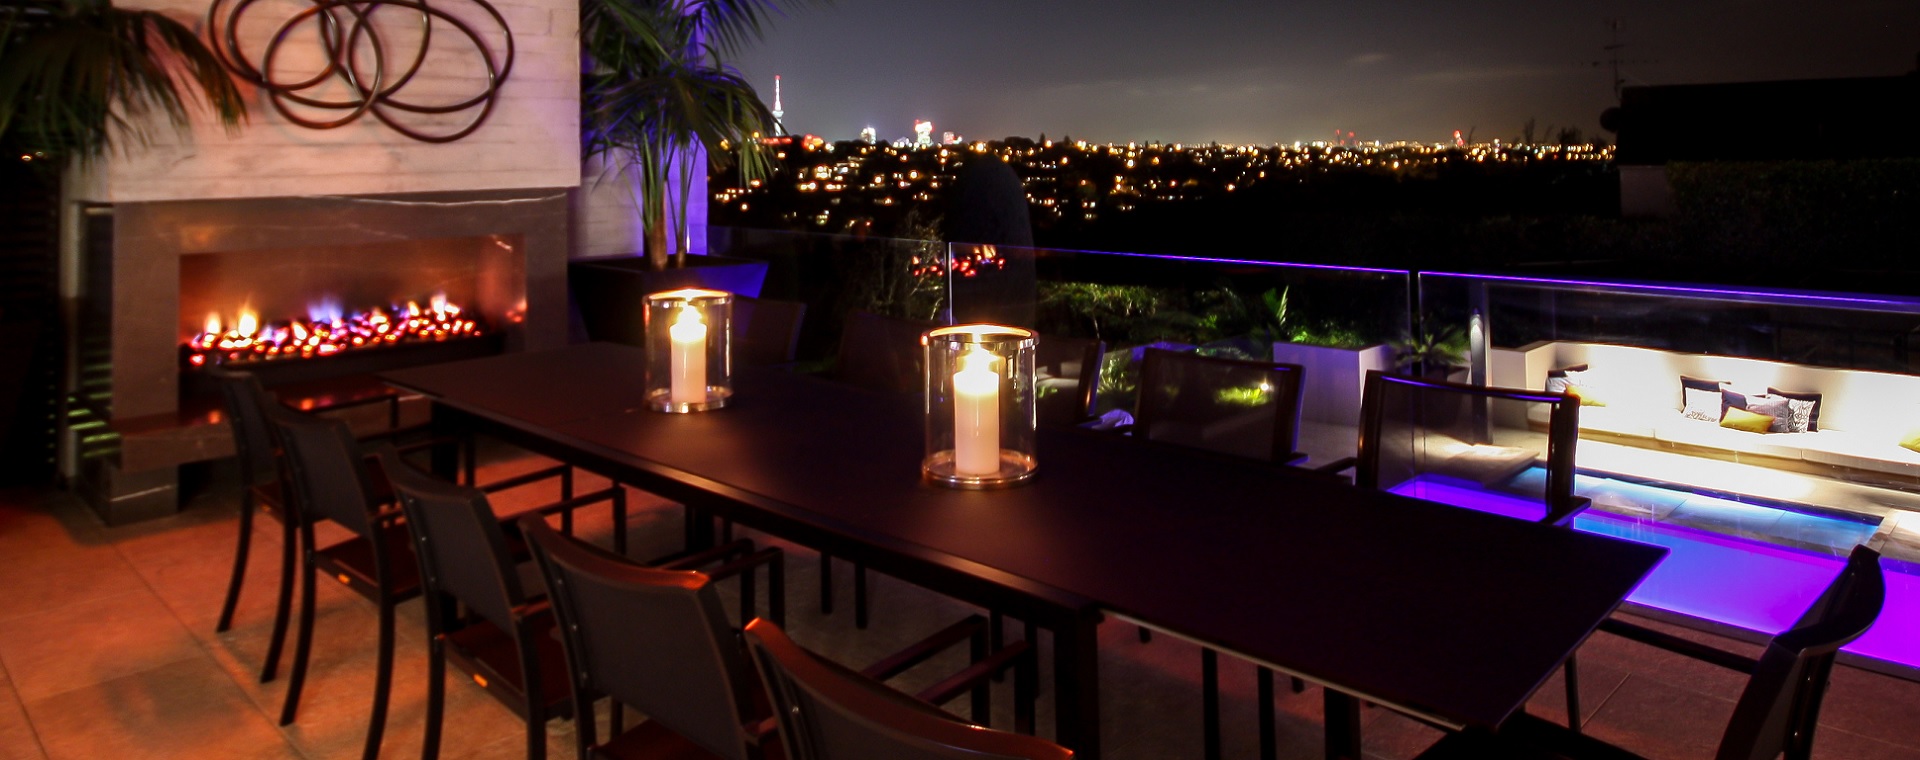 Stunning outdoor dining setting with fireplace, pool and evening cityscape featuring home automation control